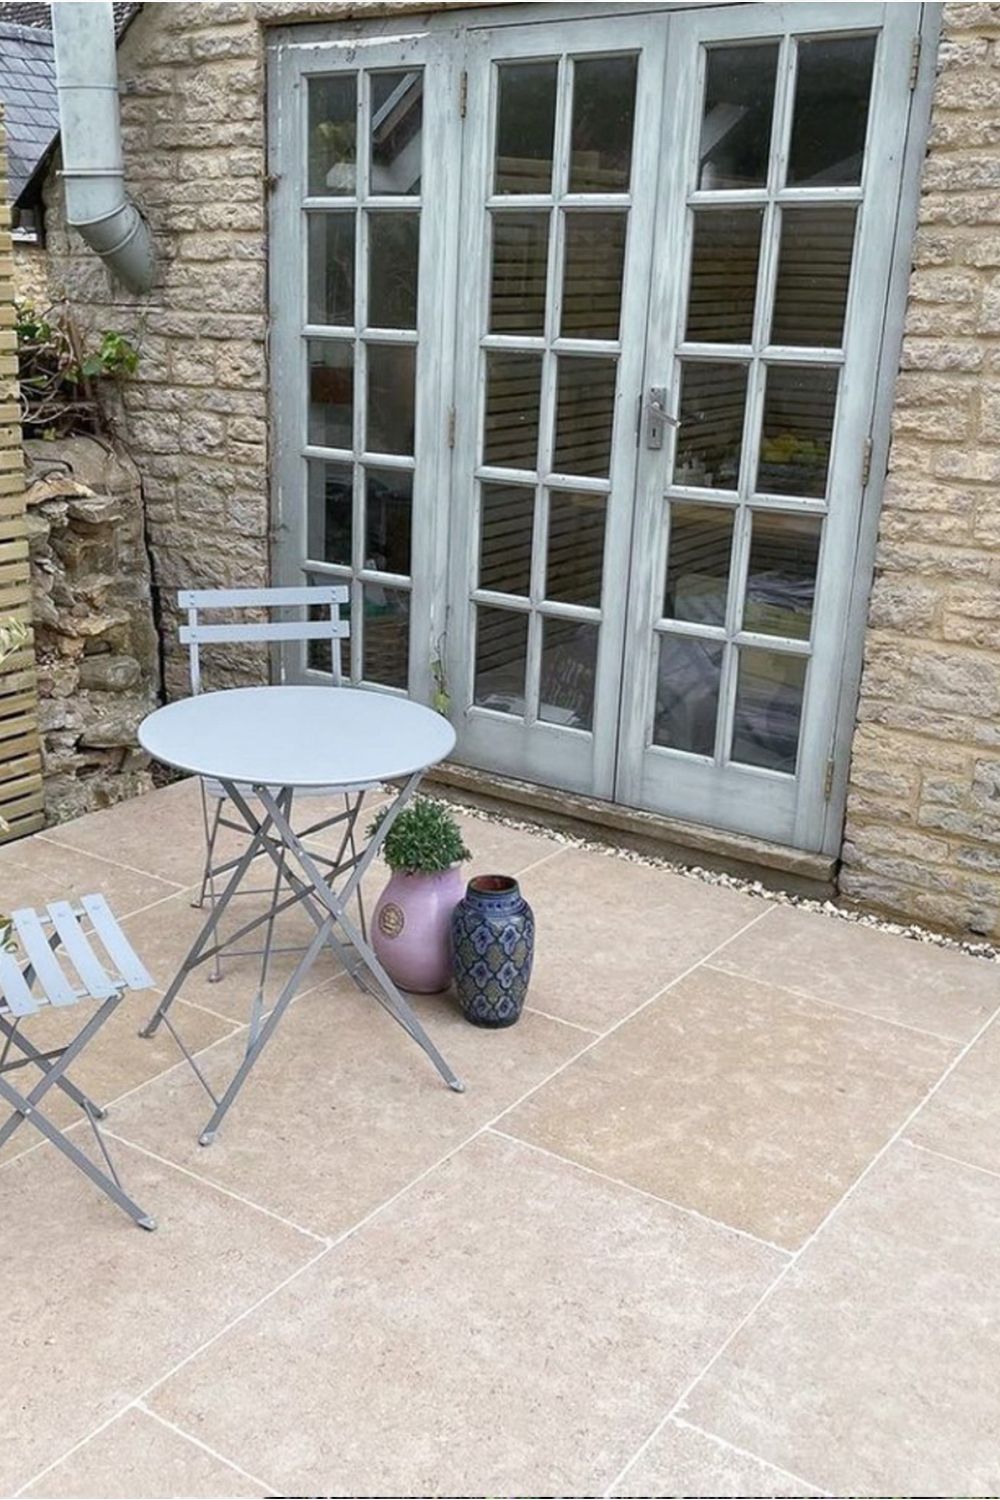 The Ultimate Guide to Choosing and Installing Garden Paving Slabs